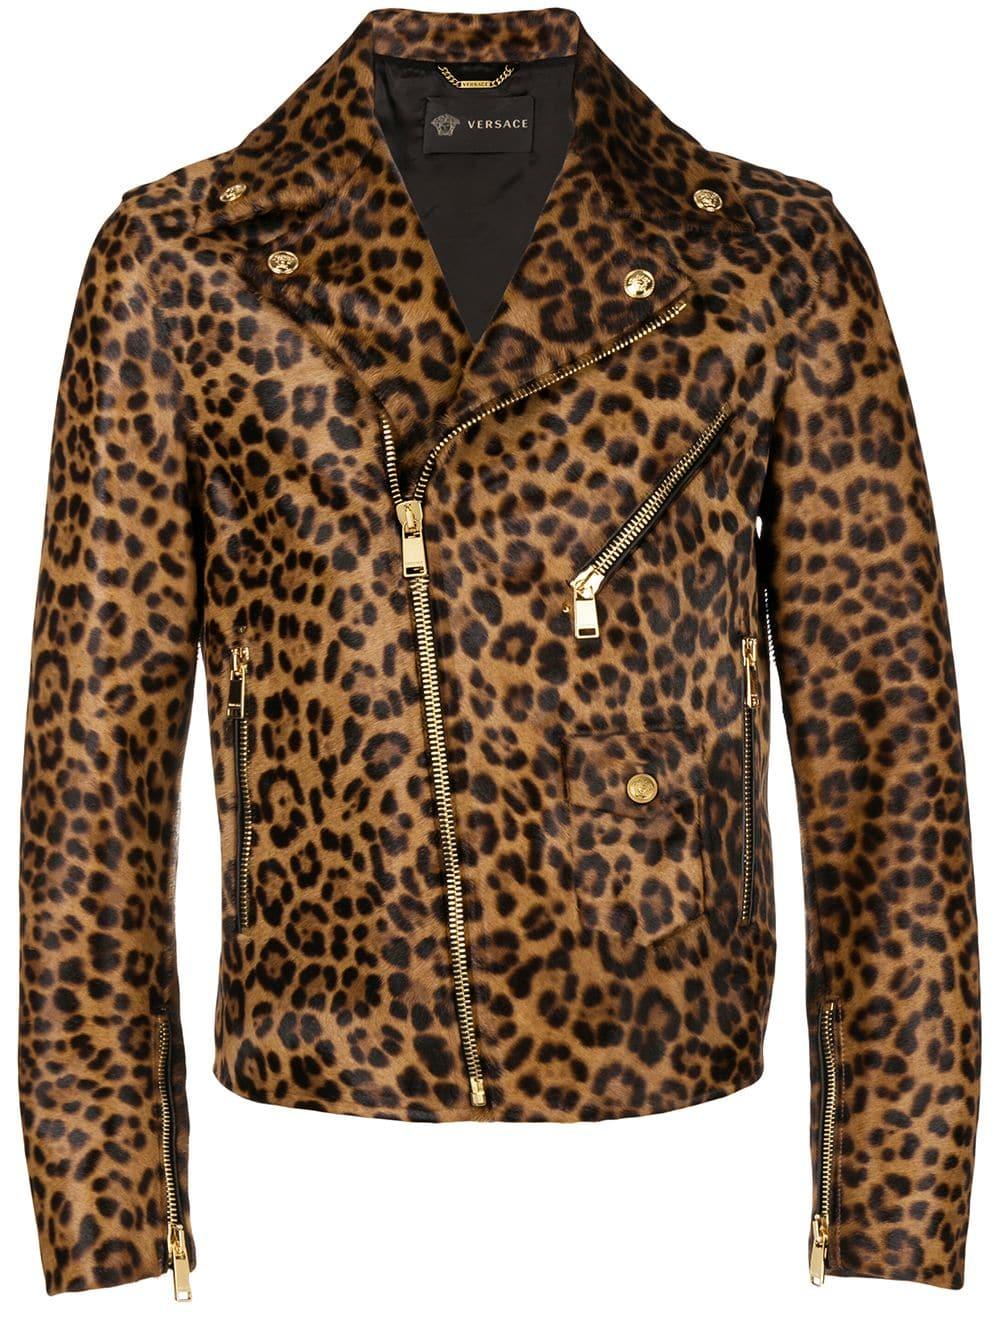 L'Agence Leopard Print Leather Moto Jacket in Natural